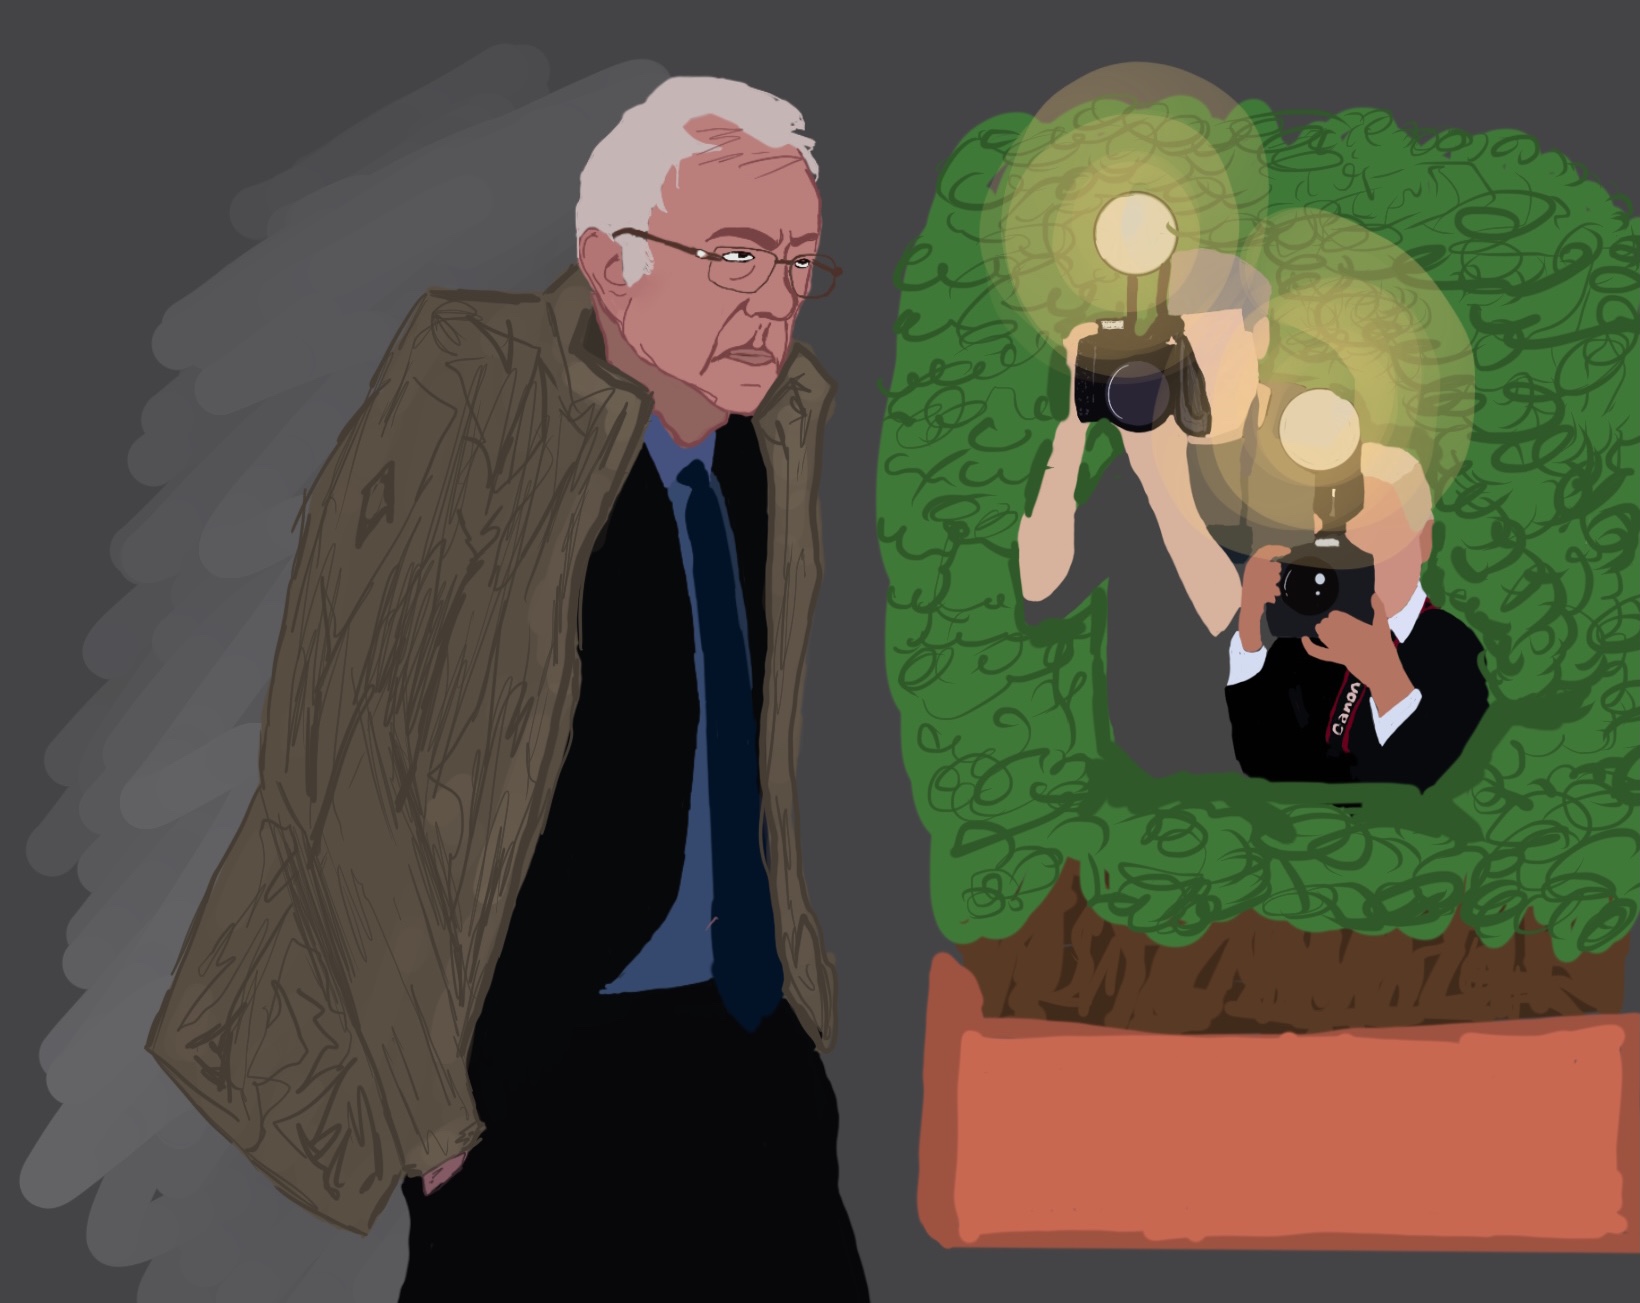 Bernie Sanders walks past a bush as paparazzi peer out with flashing cameras, hoping to snap a photo